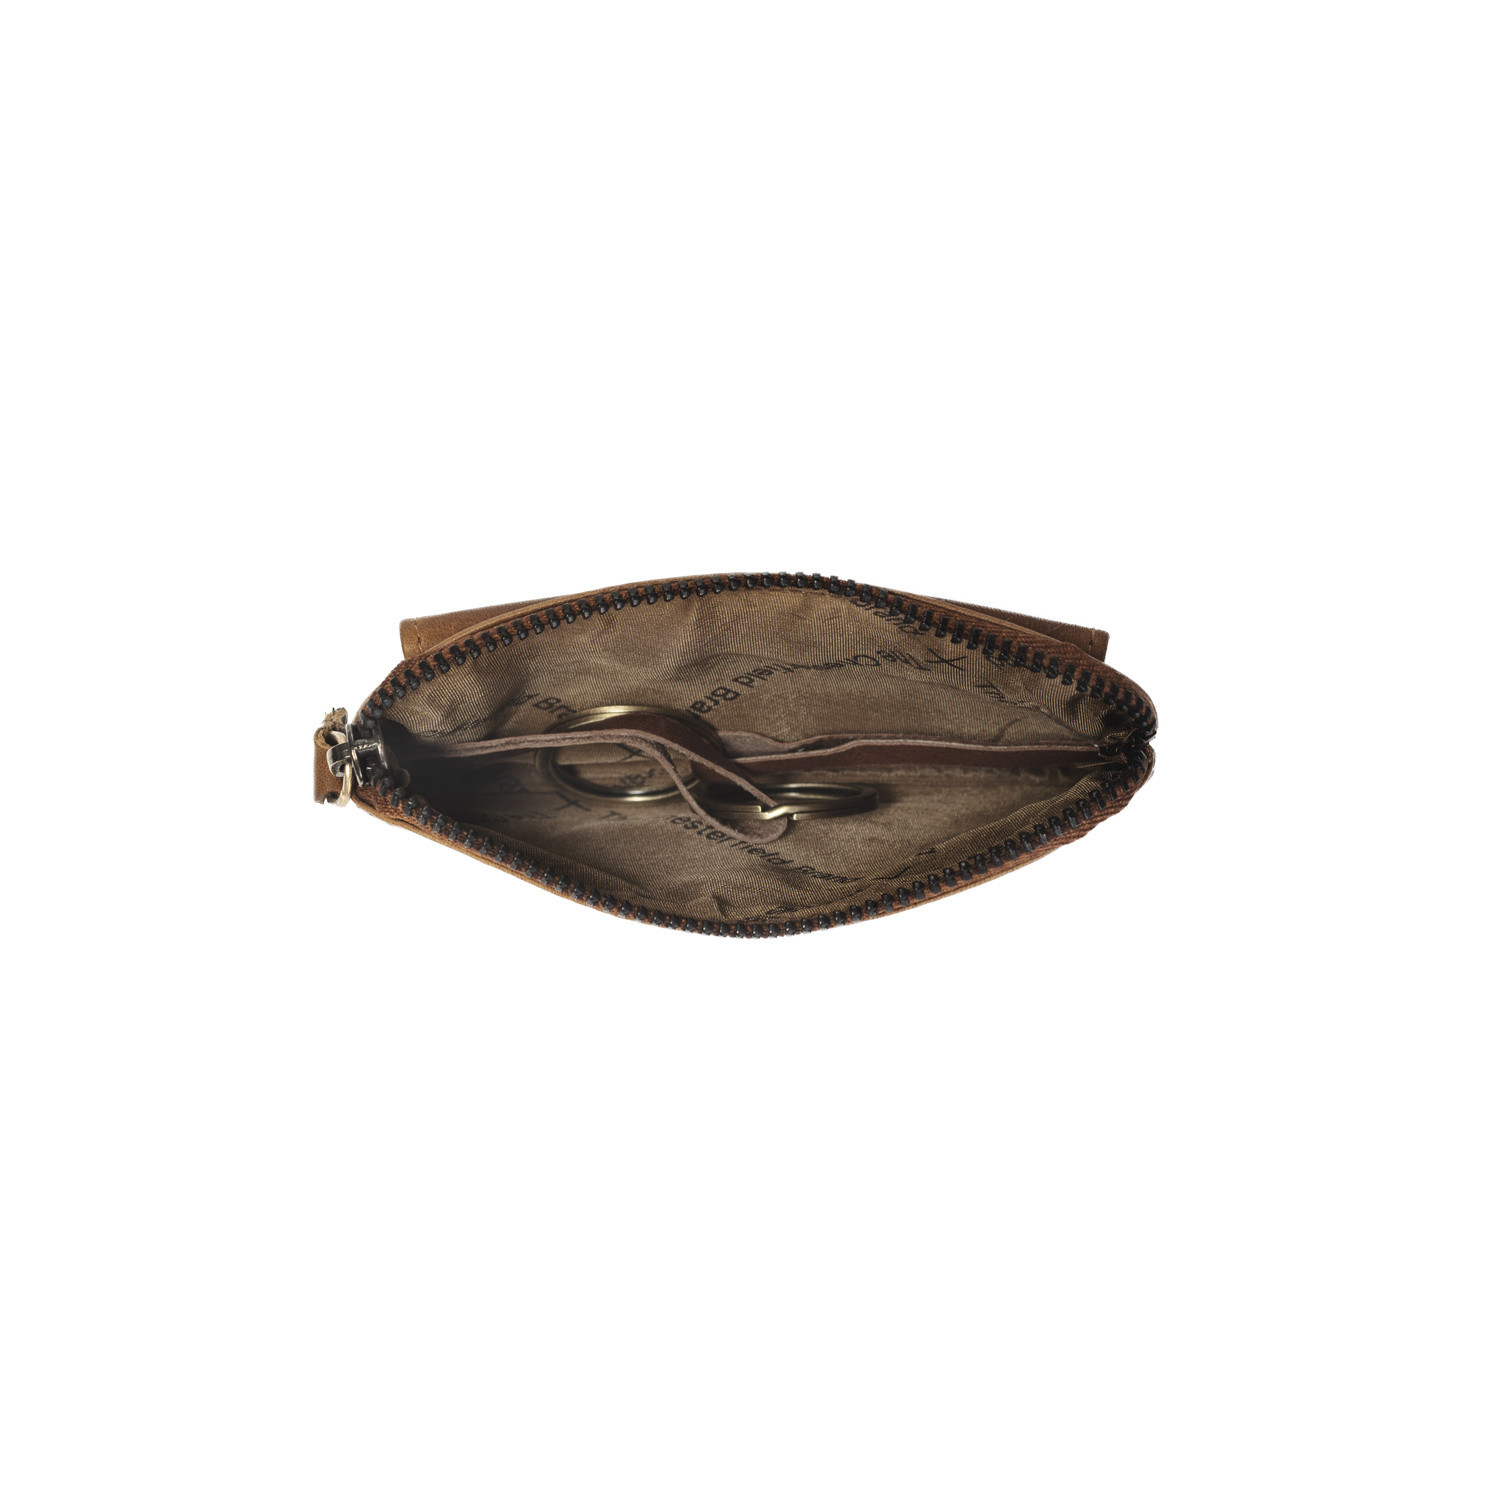 Leather Key Pouch Cognac Oliver - The Chesterfield Brand